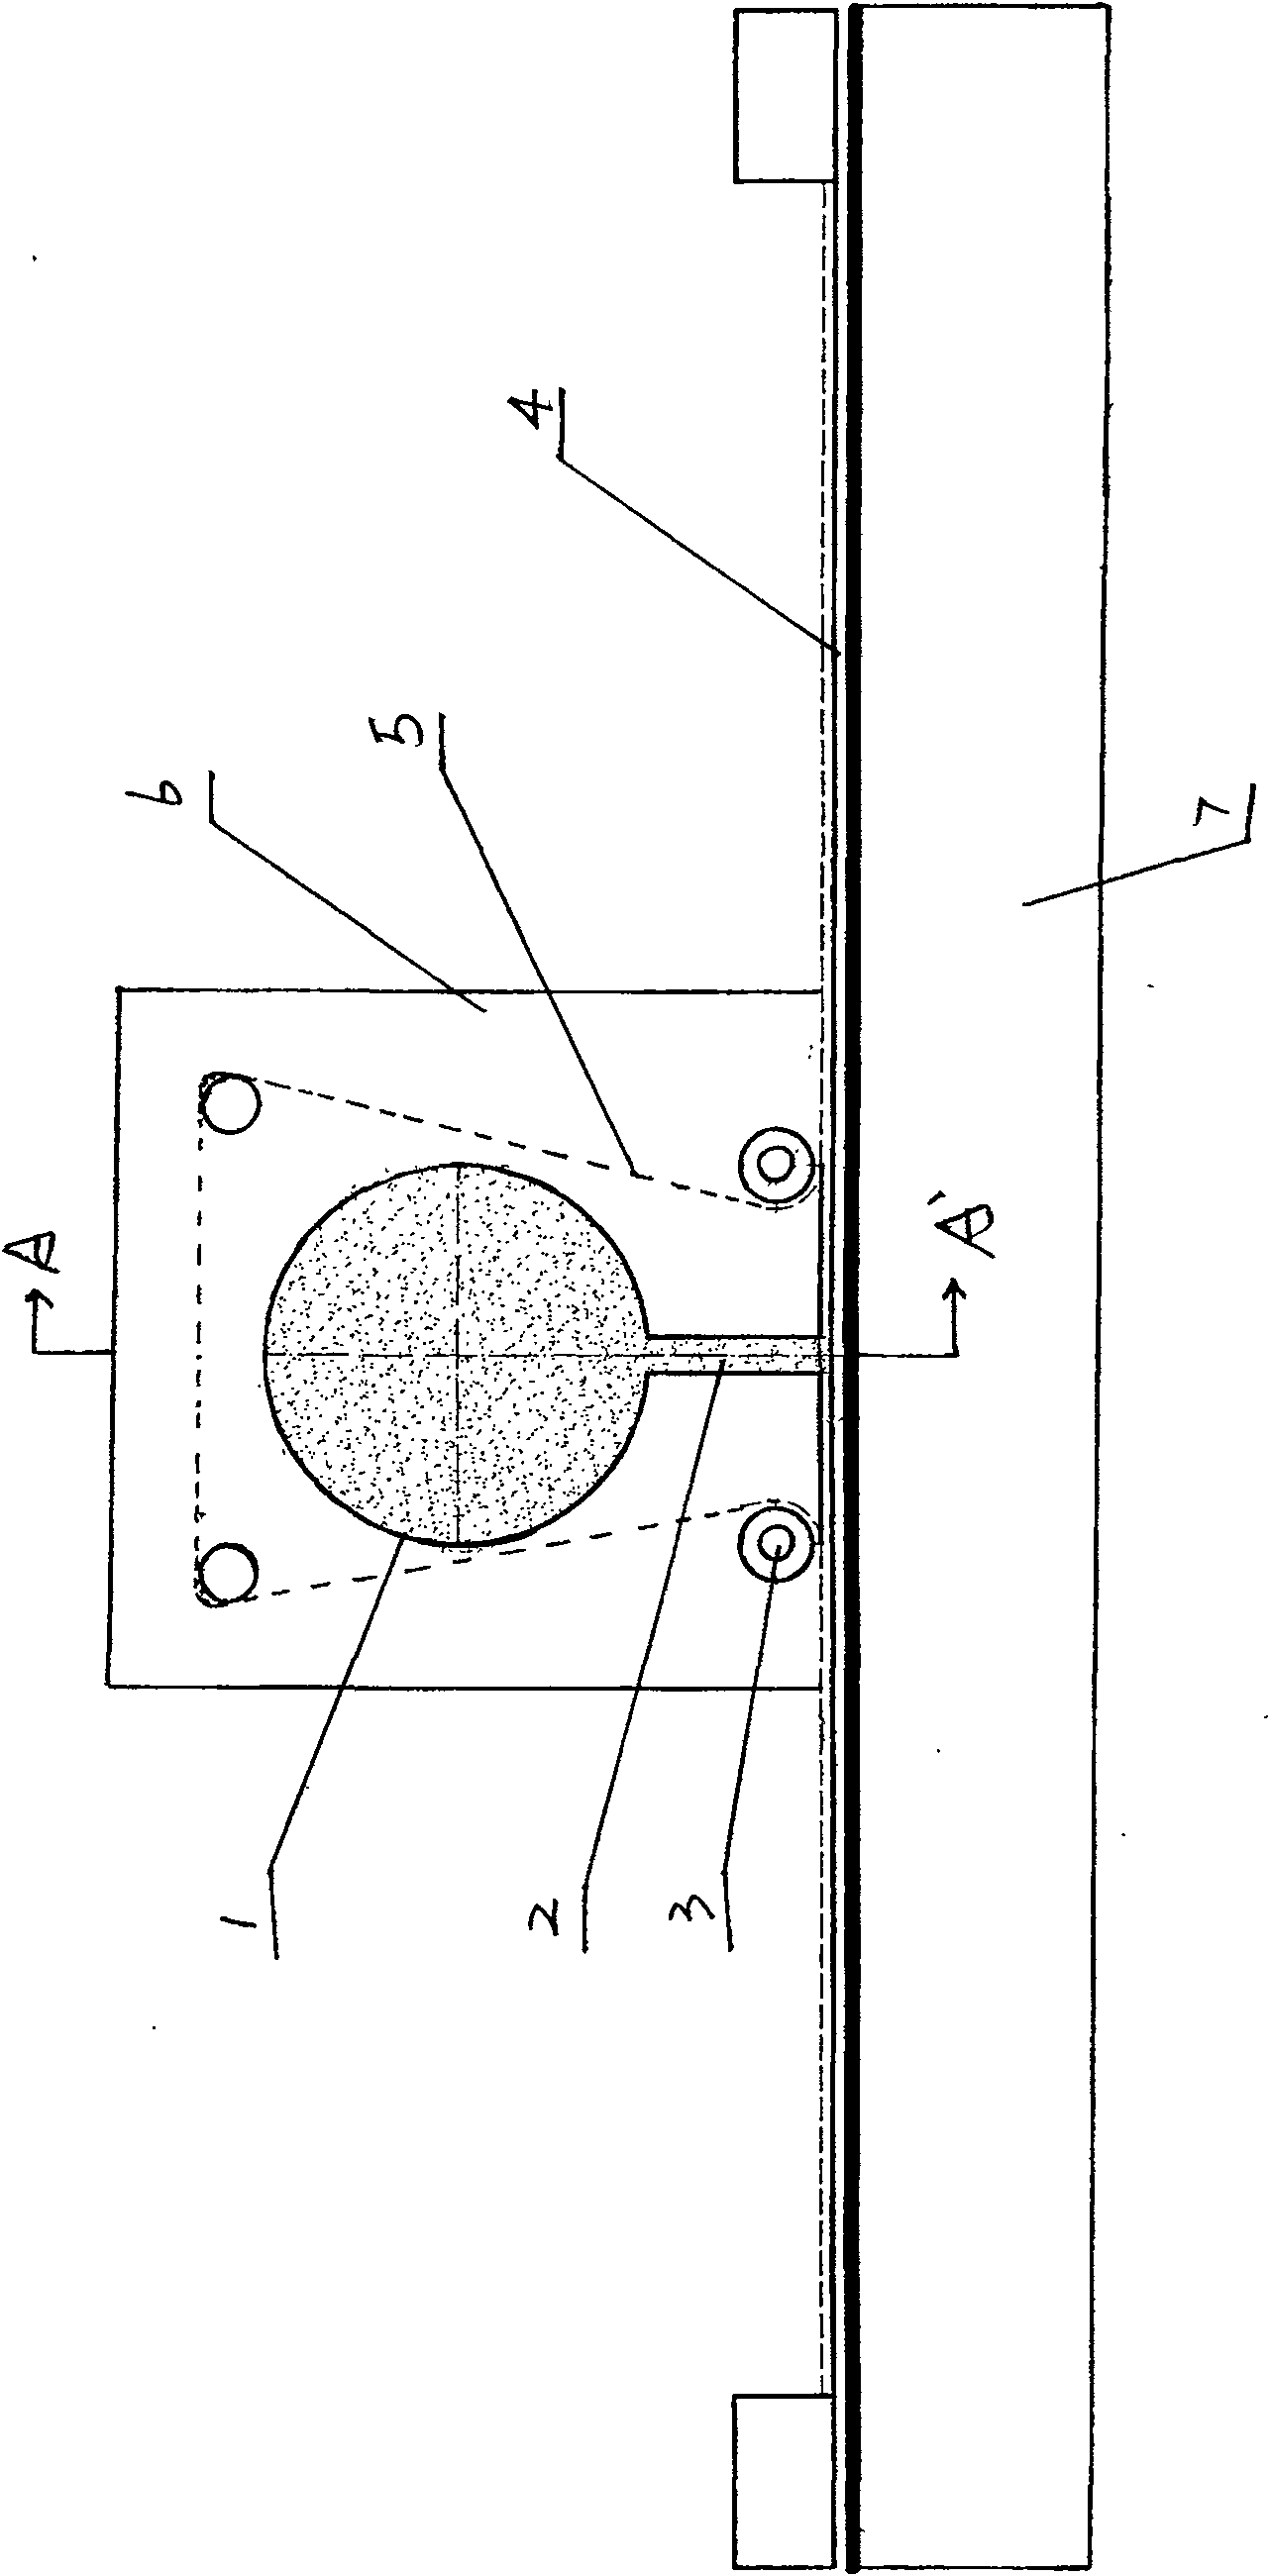 Fabric dyeing and printing device